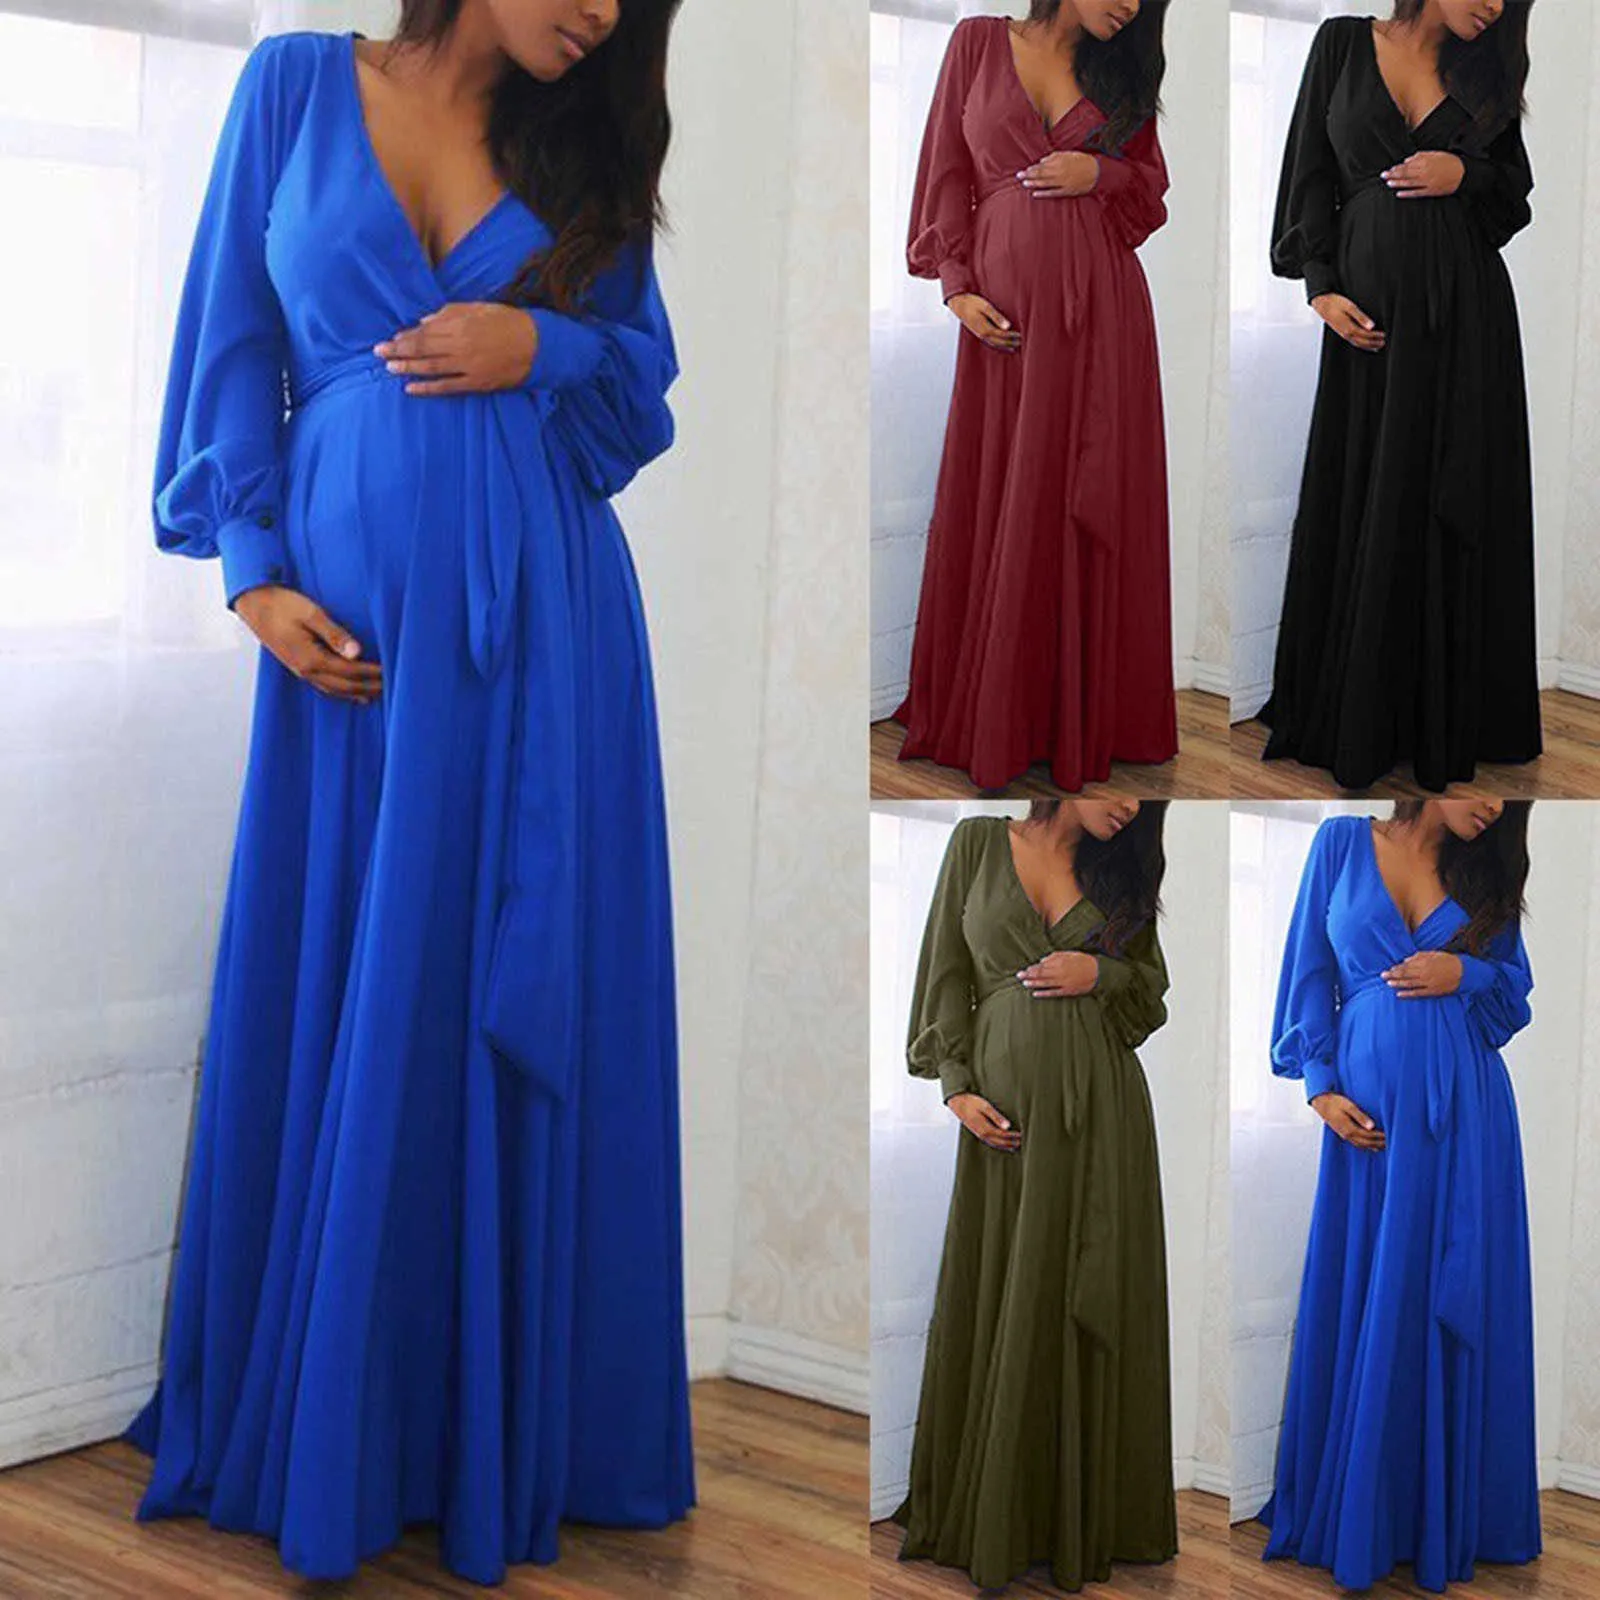 Maternity Dress Summer Ribbed Soft High Slit Ruched Sleeveless Sundress  Sexy Bodycon Pregnancy Dresses - Dresses - AliExpress